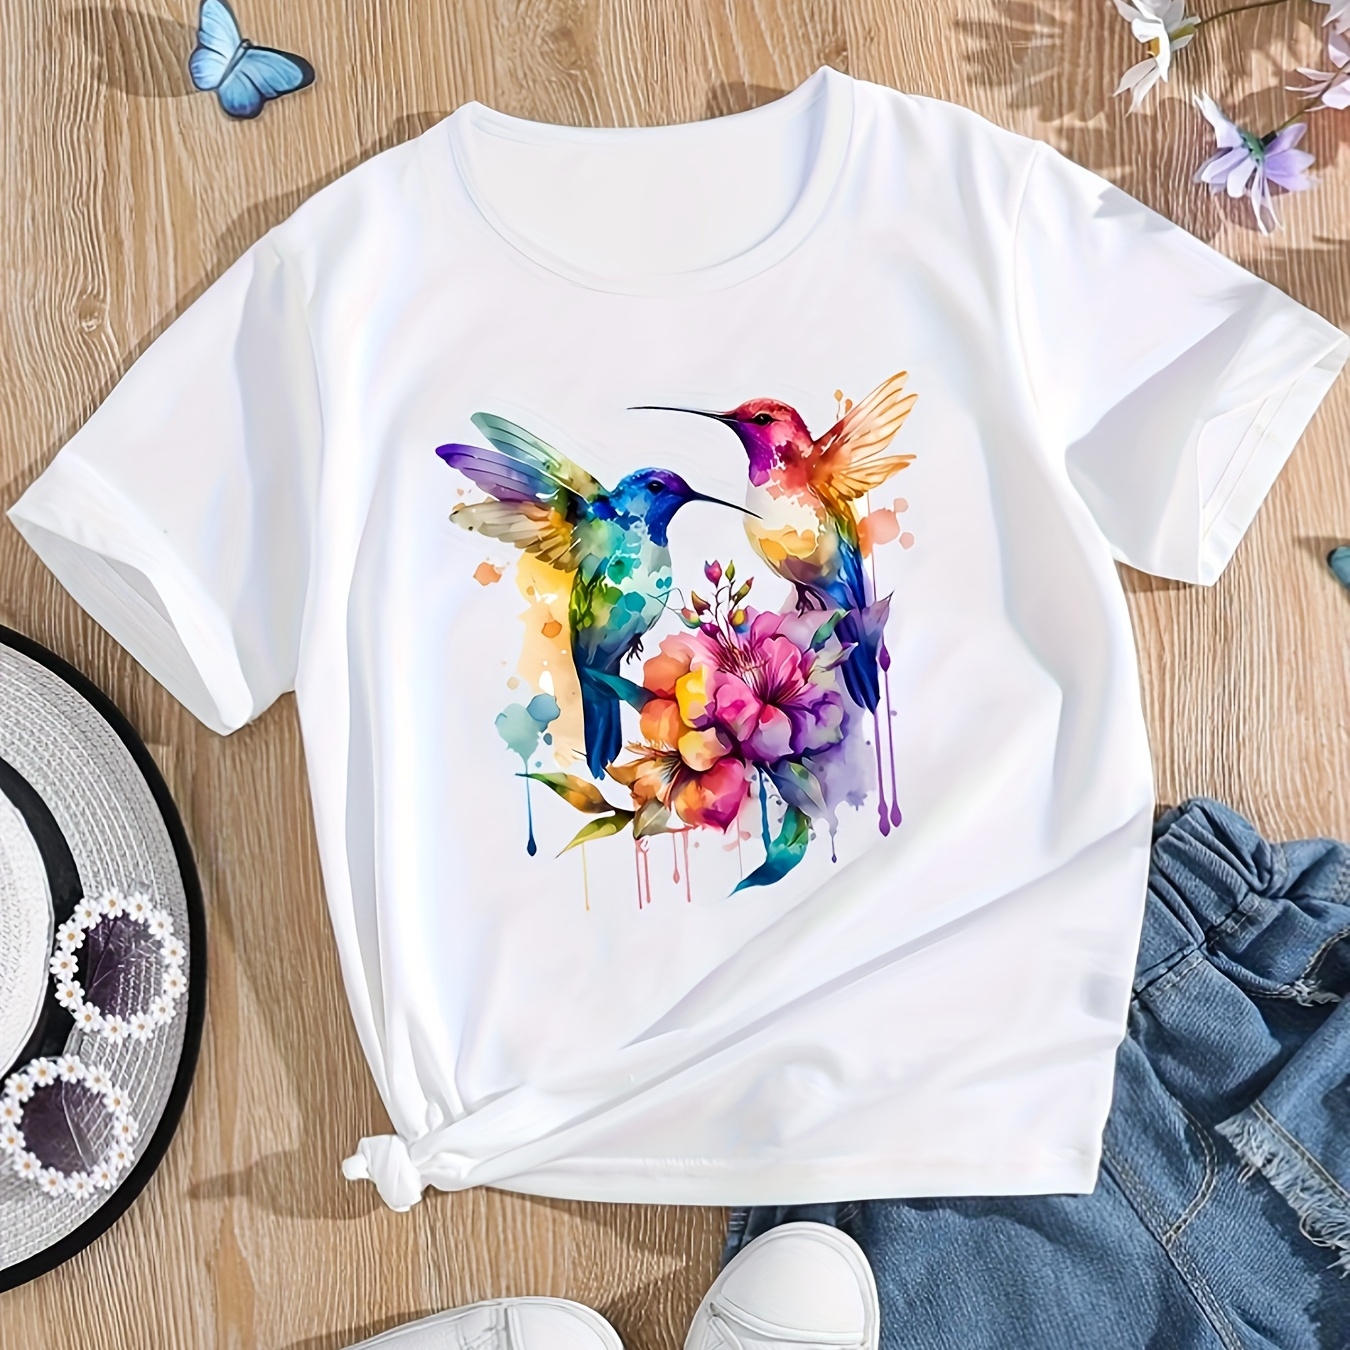 

Bird & Floral Print T-shirt, Casual Crew Neck Short Sleeve Top For Spring & Summer, Women's Clothing